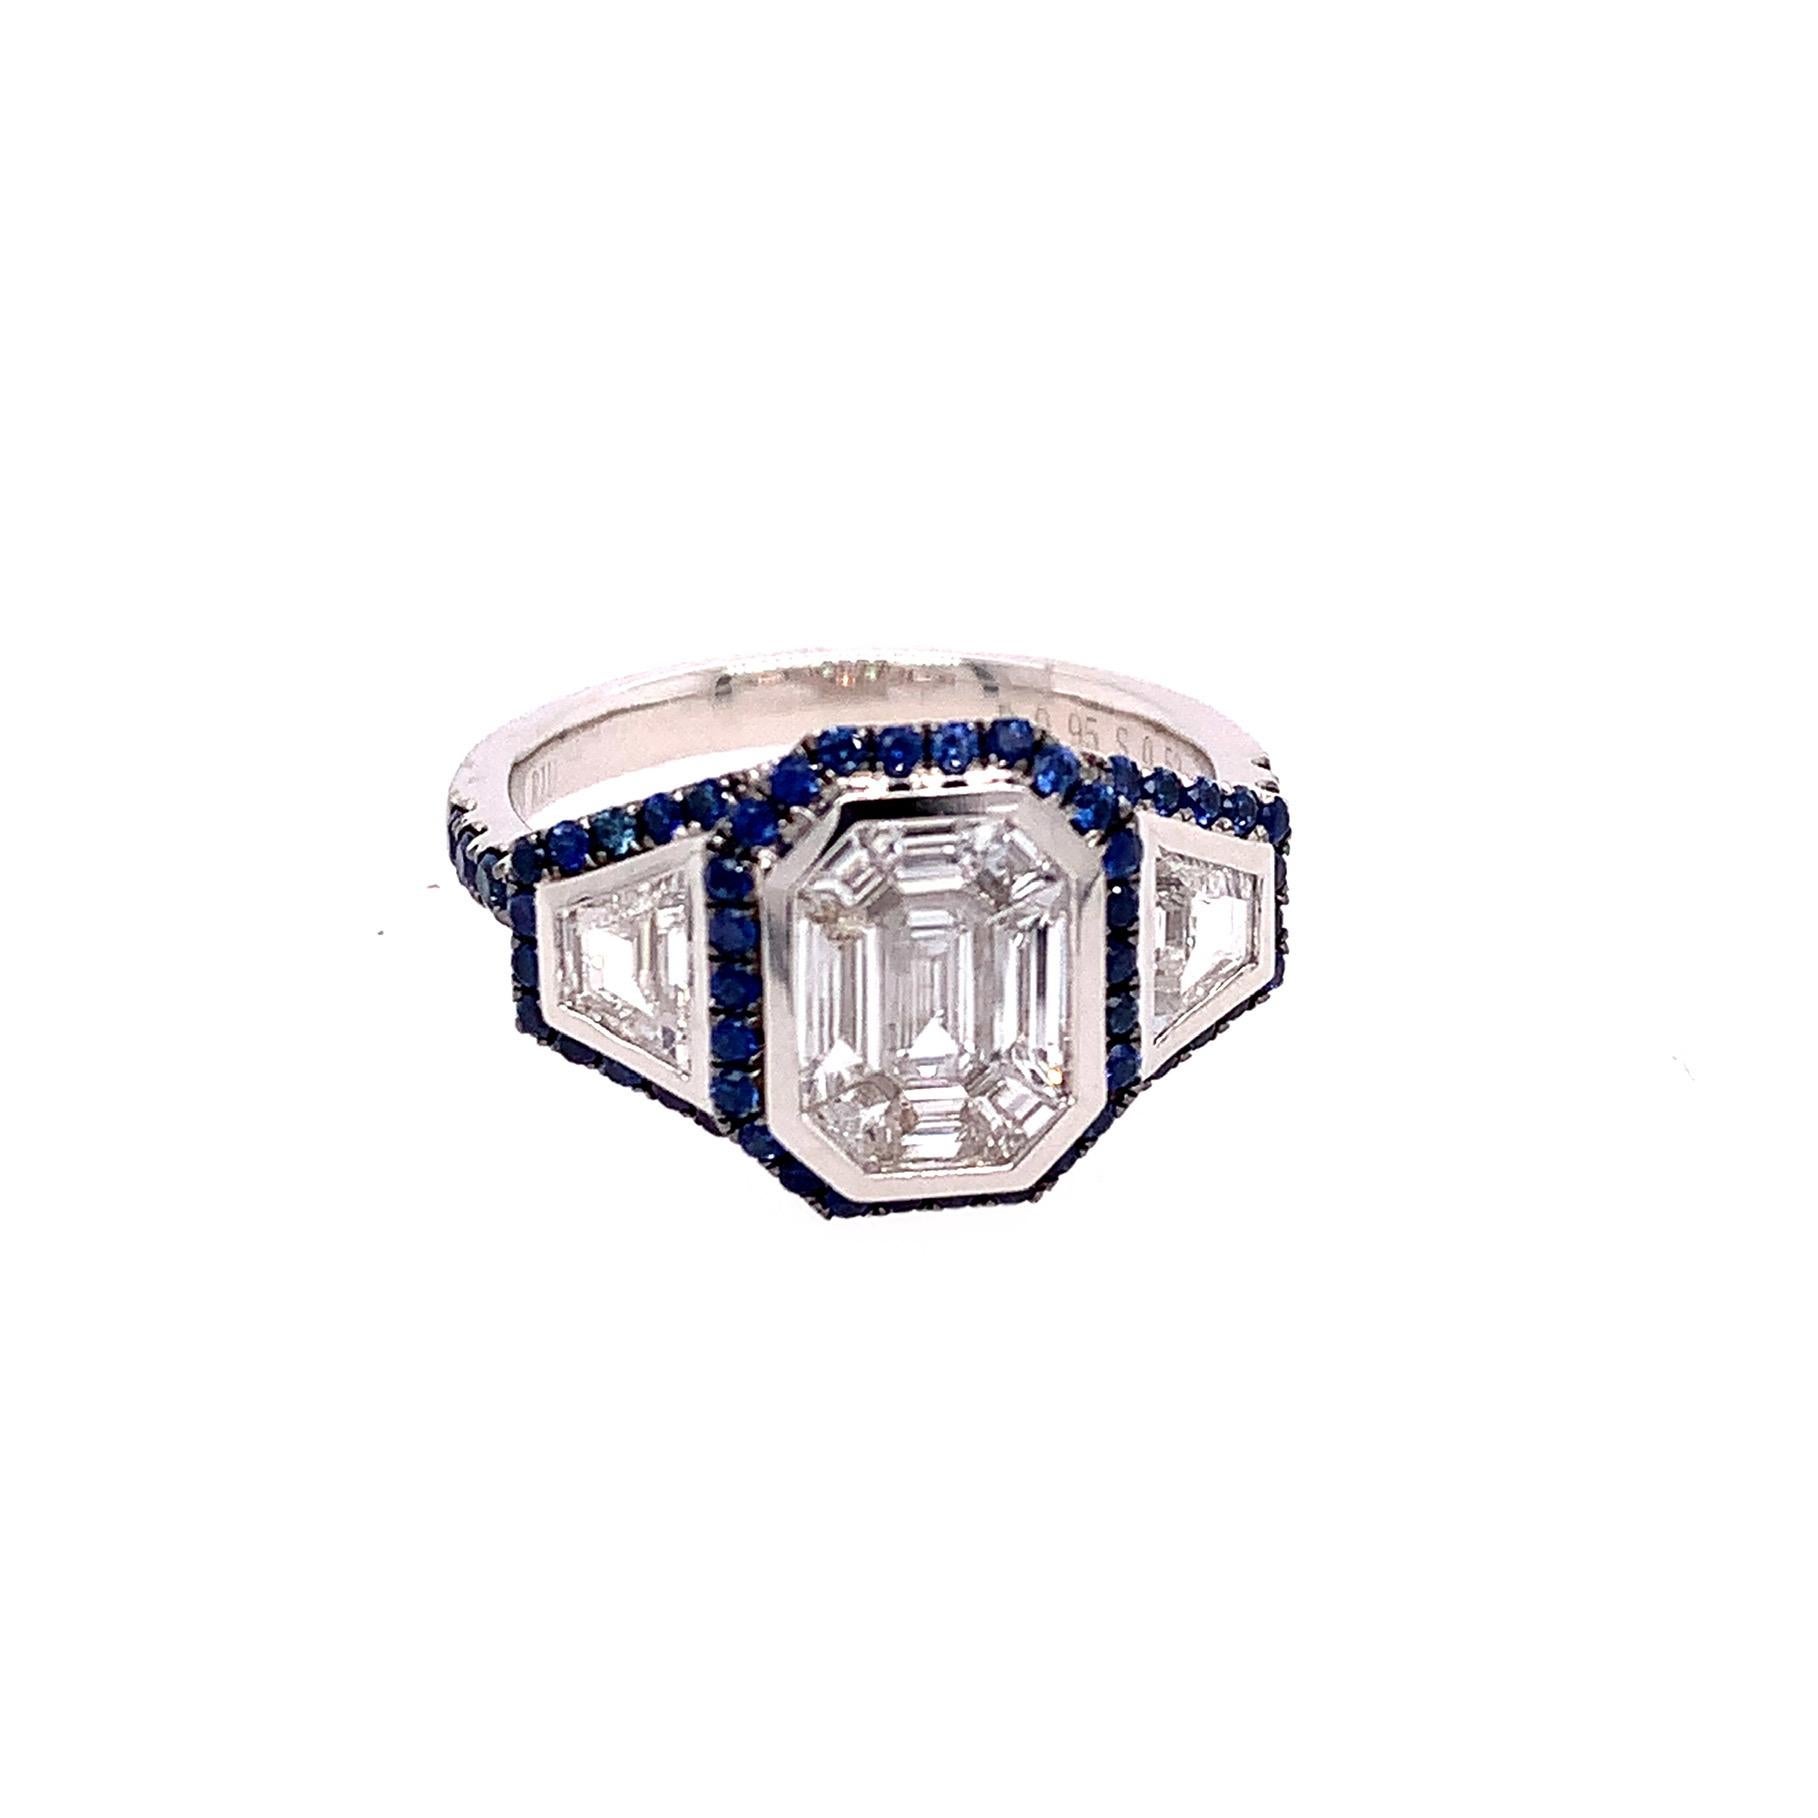 18K White Gold
Diamond: 0.94 ct total weight
Blue Sapphire: 0.53 ct total weight
Center diamonds are G-H/VS stones

